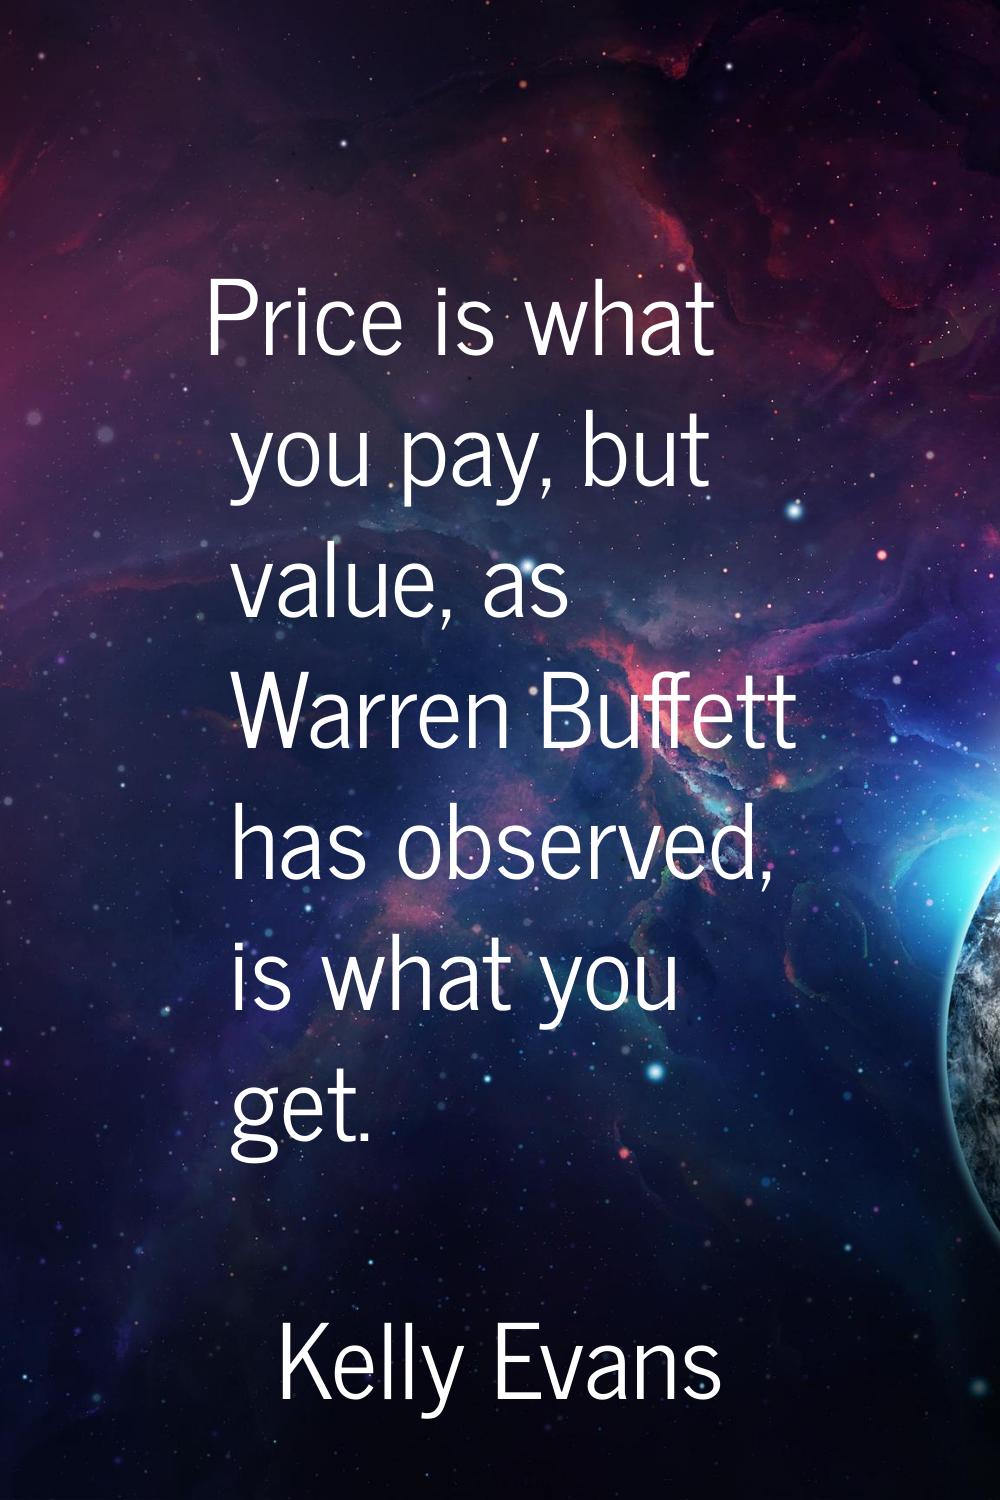 Price is what you pay, but value, as Warren Buffett has observed, is what you get.